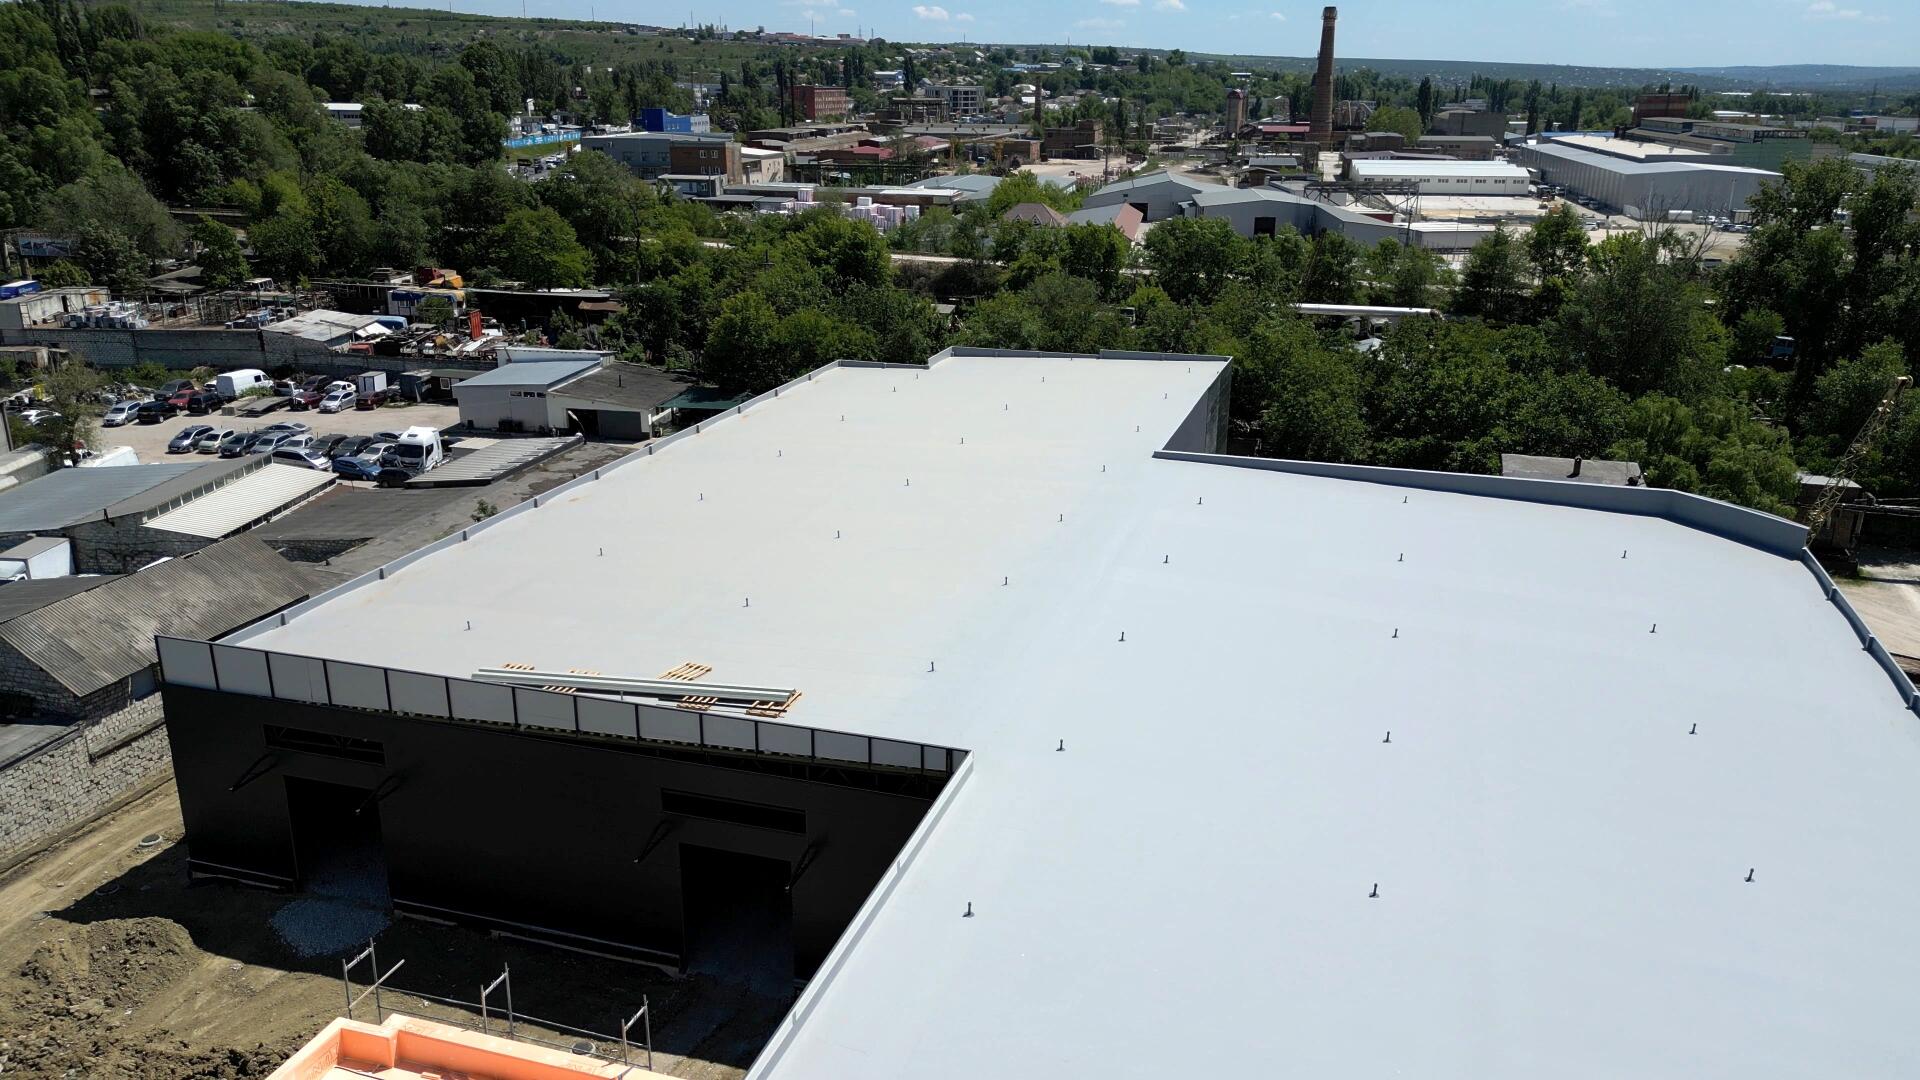 Roofing of the production facility at the Uzinelor street